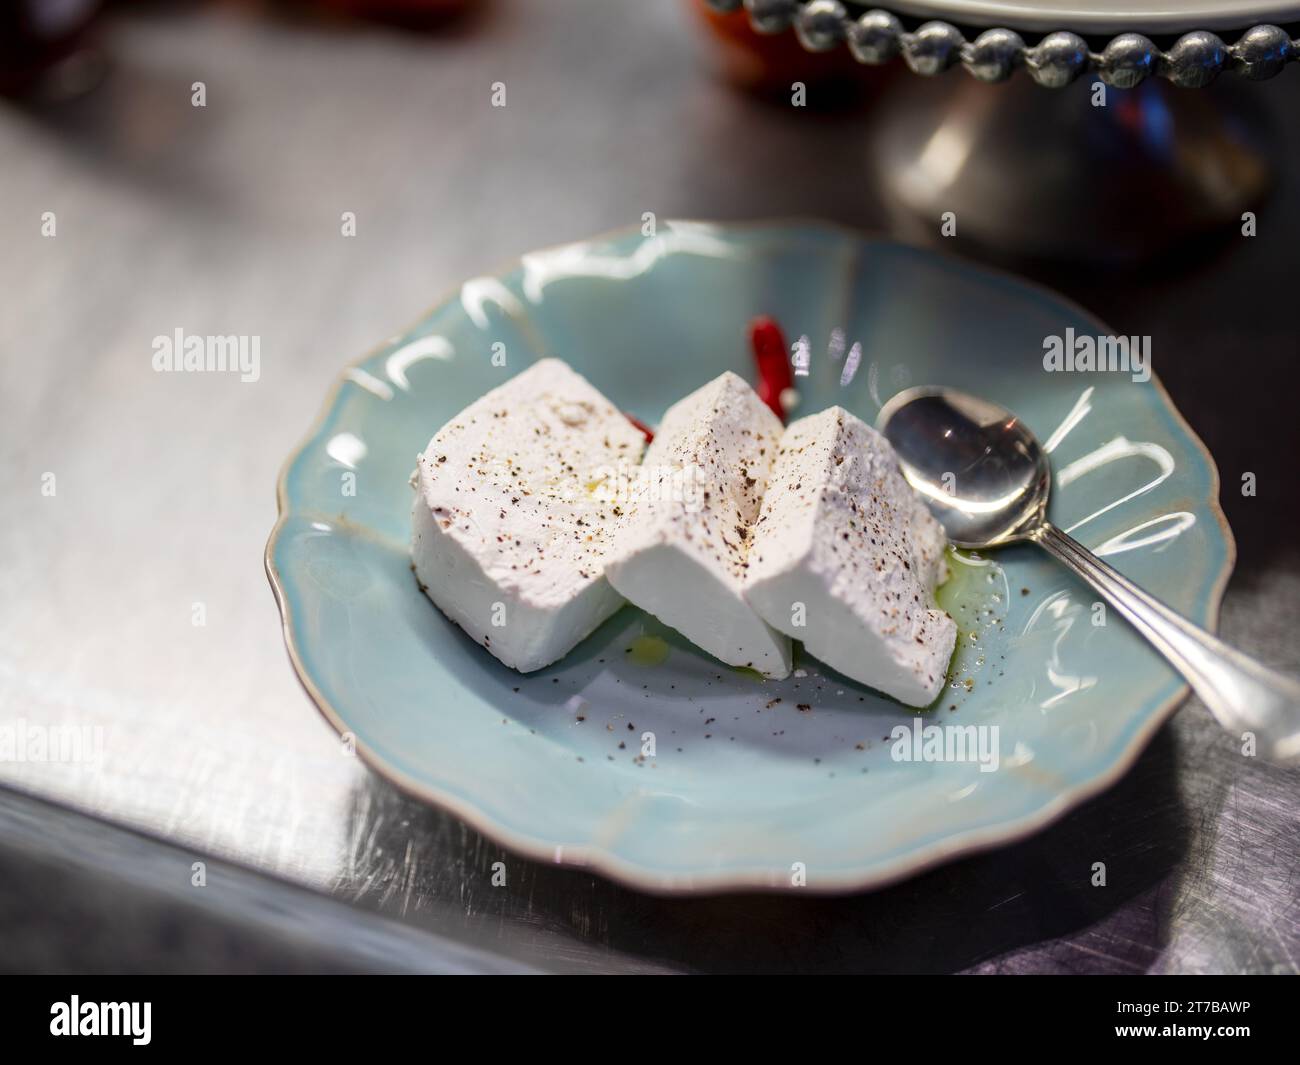 Color image of a turquoise serving plate with feta cheese on it on a salad bar. Stock Photo